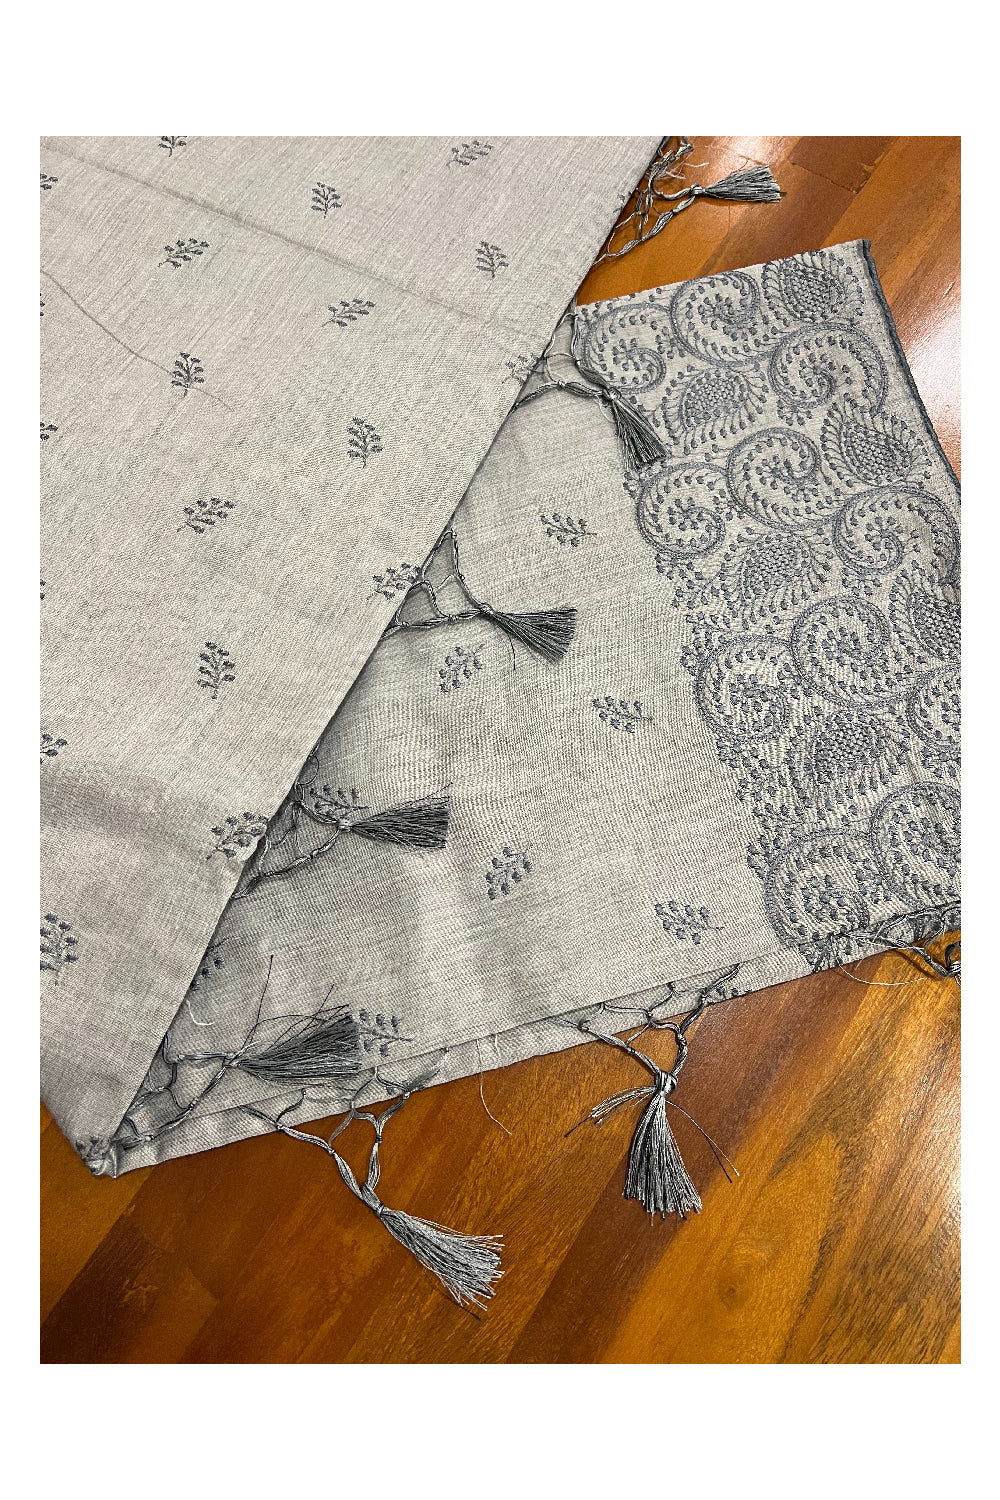 Southloom Grey Cotton Designer Saree with Embroidery Work